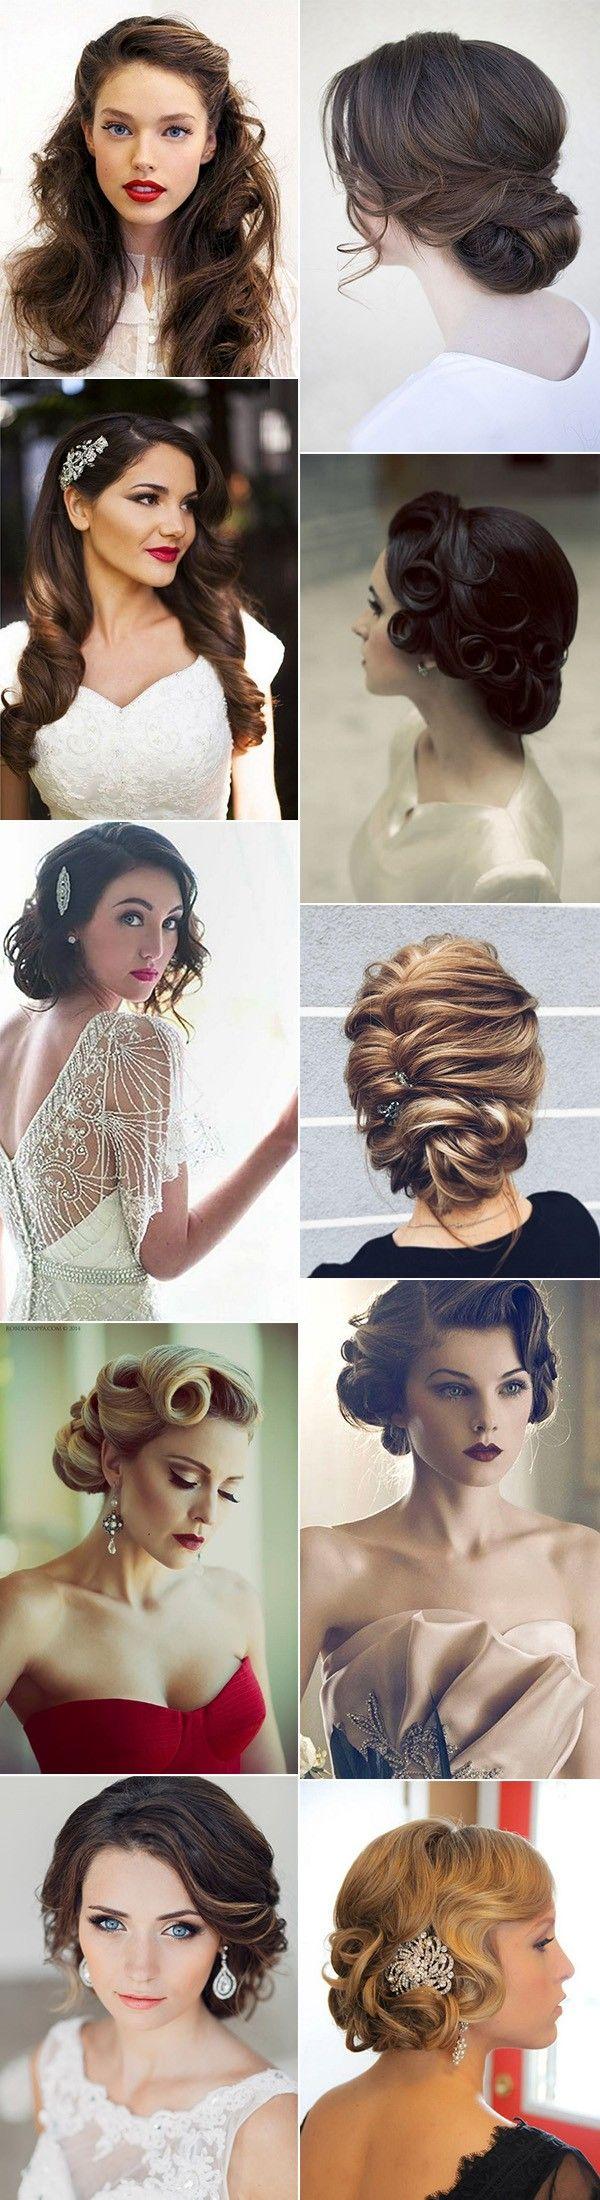 Свадьба - Top 20 Vintage Wedding Hairstyles For Brides - Page 2 Of 3